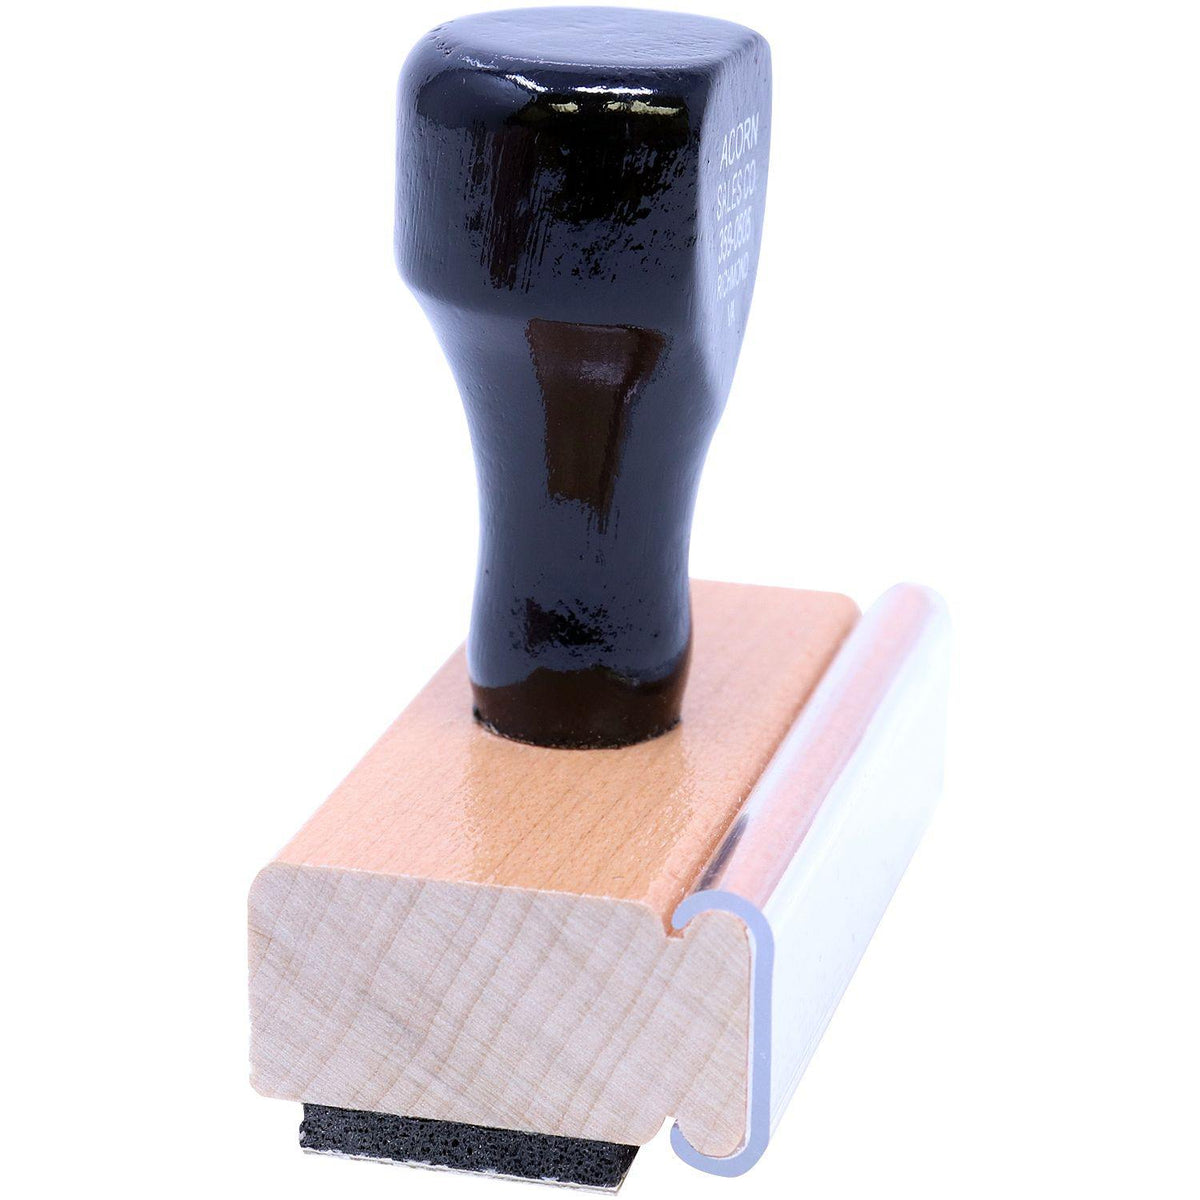 Side View of Improving Rubber Stamp at an Angle